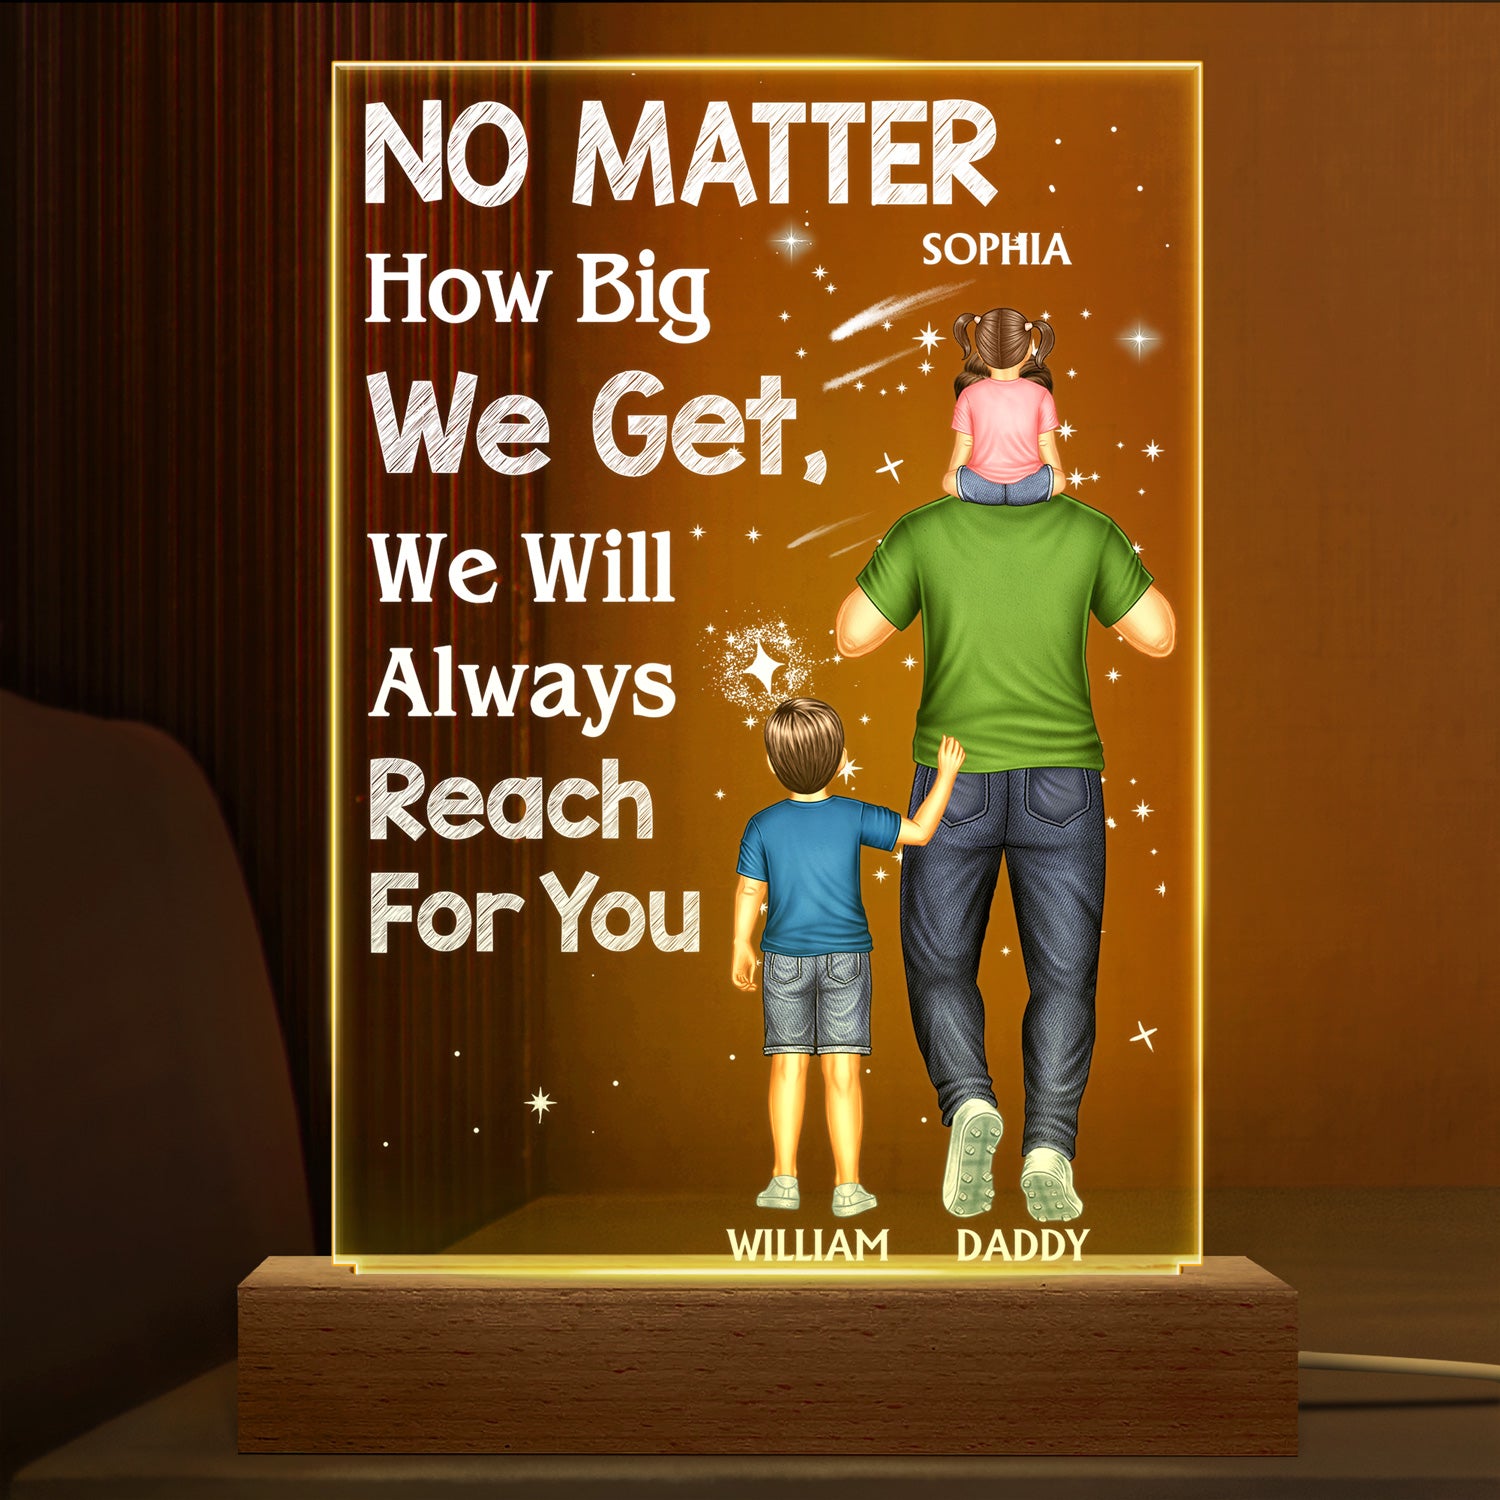 We Will Always Reach For You - Birthday Gift For Dad, Father, Family - Personalized Custom 3D Led Light Wooden Base